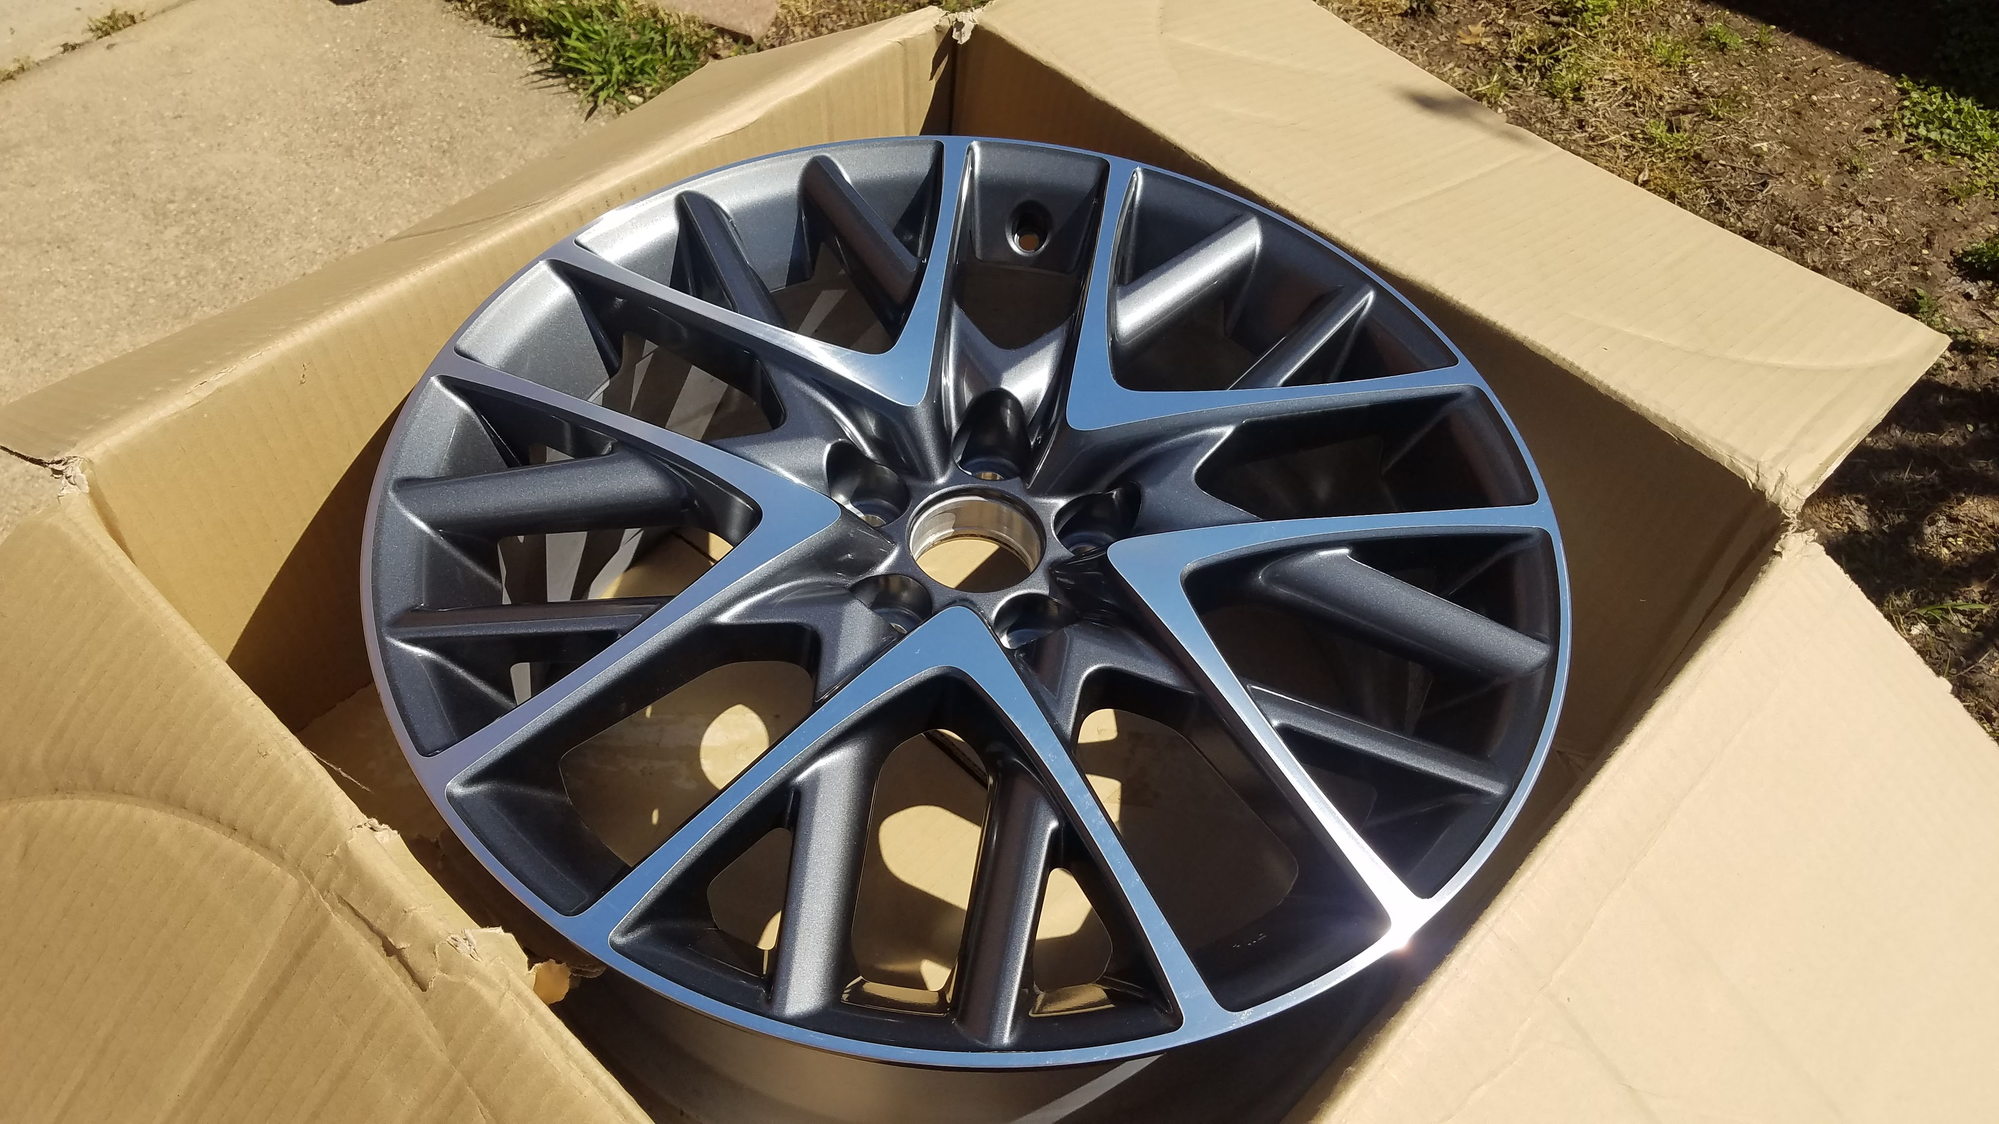 Wheels and Tires/Axles - OEM 19" Lexus RC 350 F Sport wheels, take-offs from new car - Used - 2015 to 2019 Lexus RC350 - Dfw, TX 75019, United States